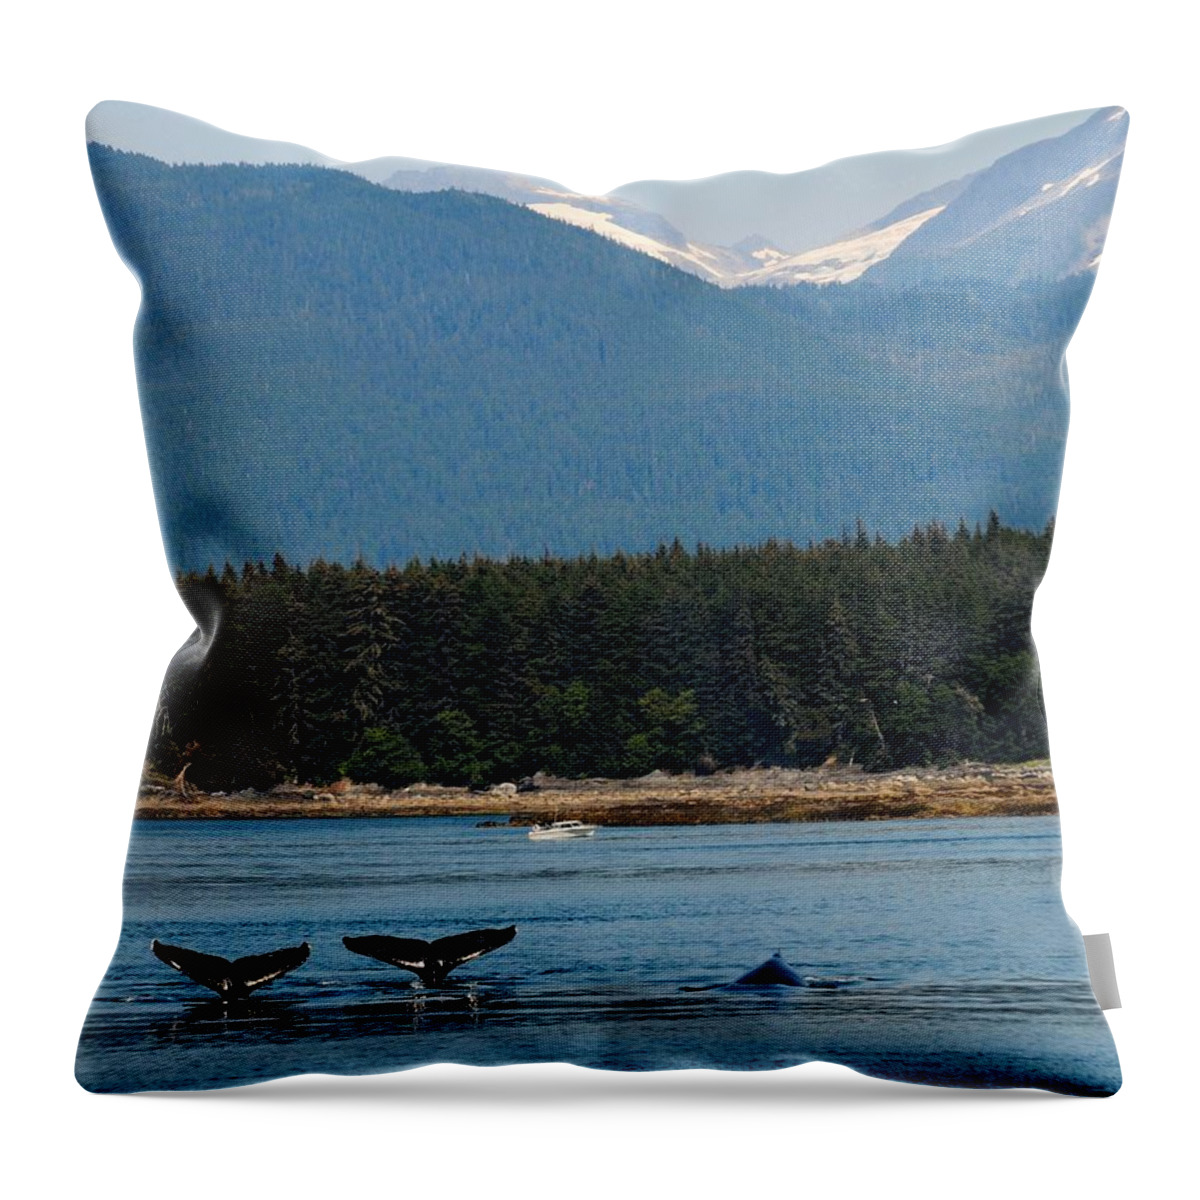 Humpback Whale Throw Pillow featuring the photograph Whales in Alaska by Ken Arcia